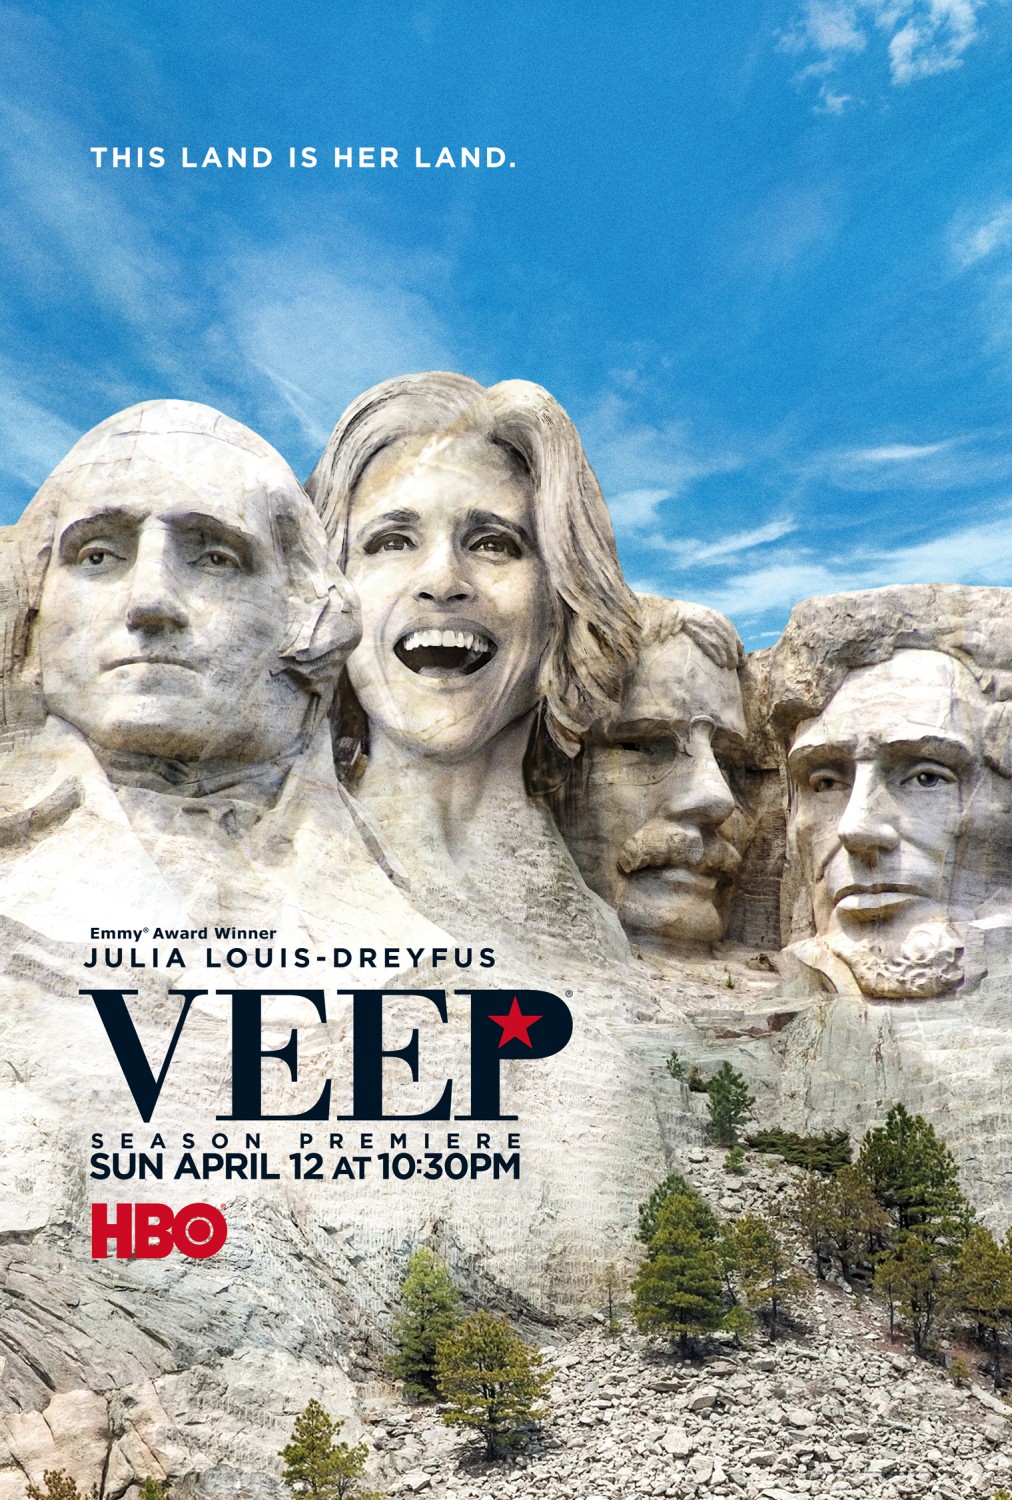 Extra Large TV Poster Image for Veep (#15 of 18)